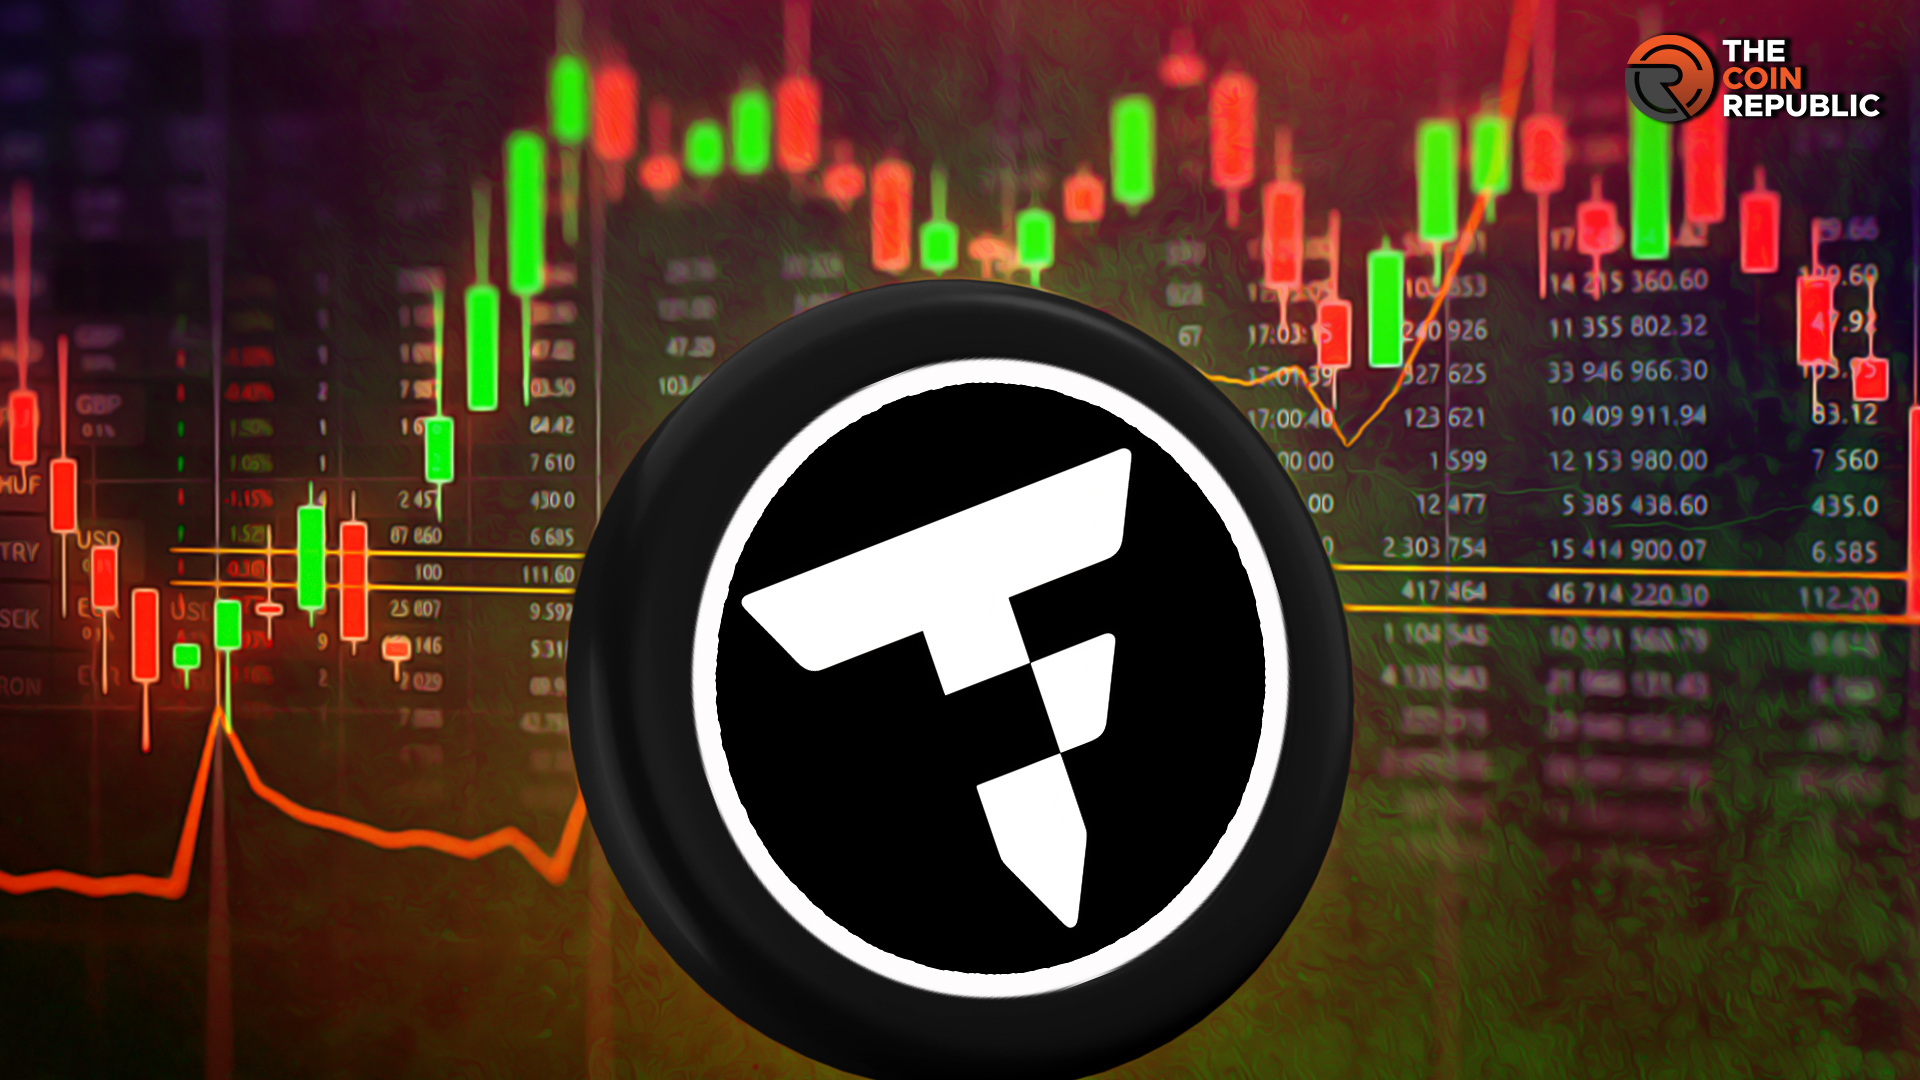 TokenFi Price Forecast: Will TOKEN End This Month On Bullish Note?